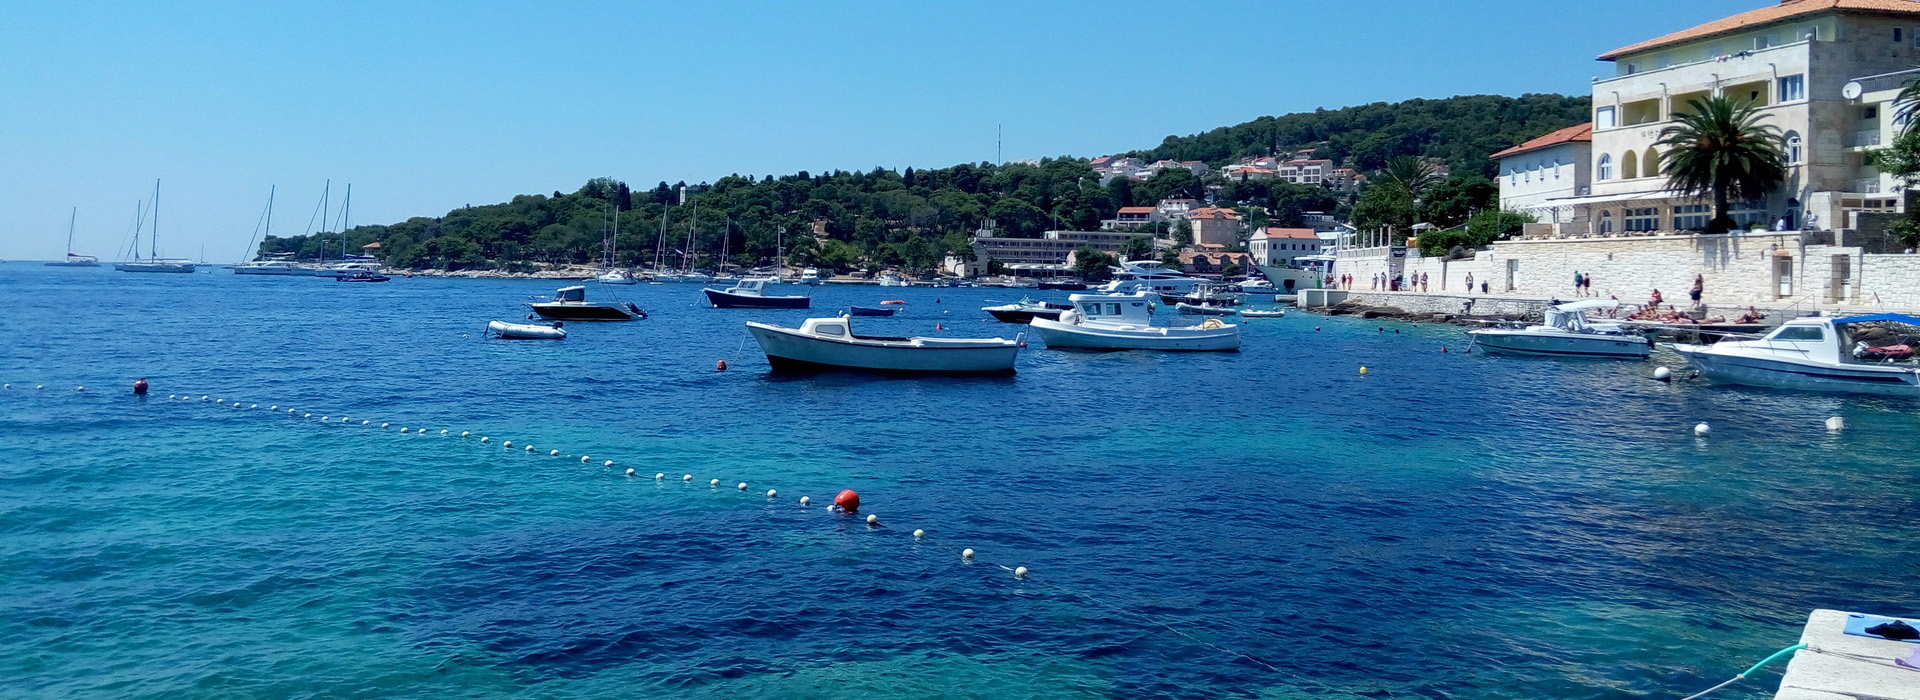 Cycling on the Dalmatian Coast guided holiday - Hvar